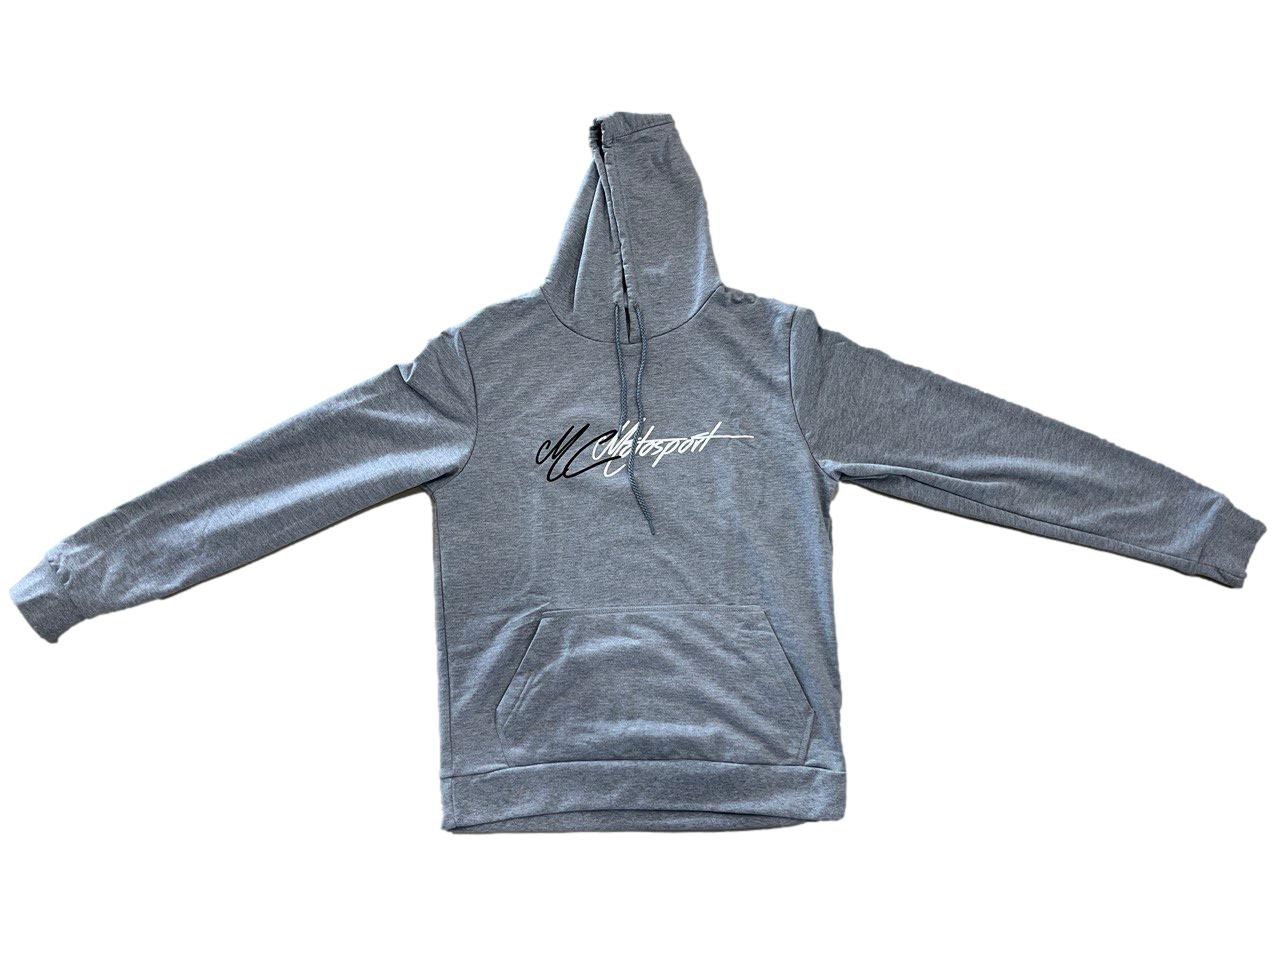 Small - MC Motosport Hoodie - One Car In Exchange Quote